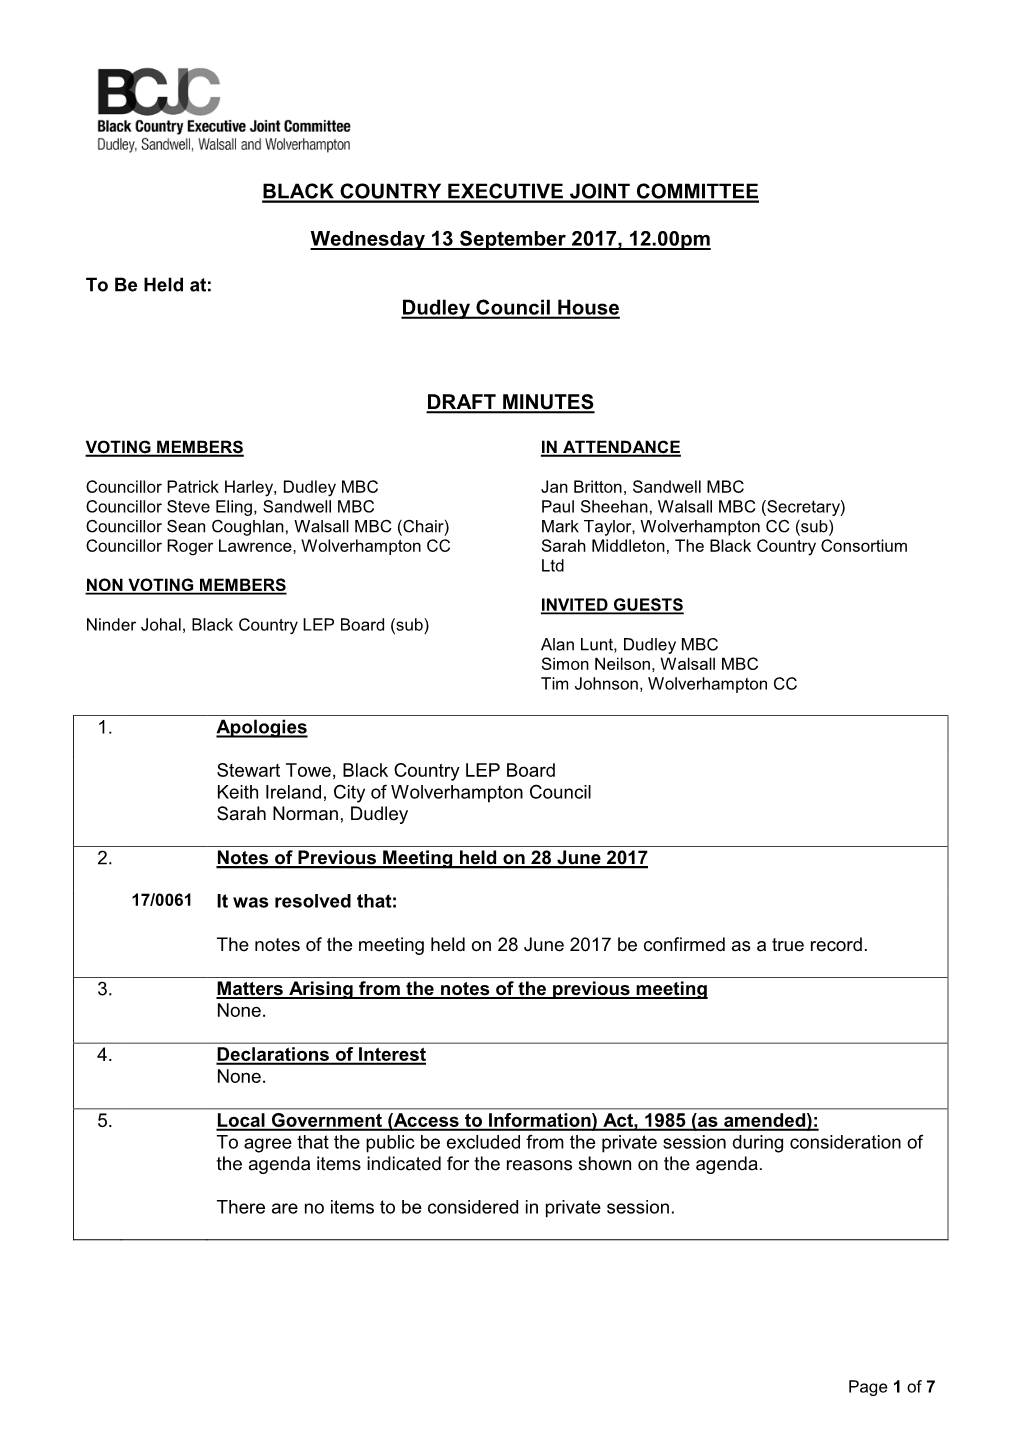 BLACK COUNTRY EXECUTIVE JOINT COMMITTEE Wednesday 13